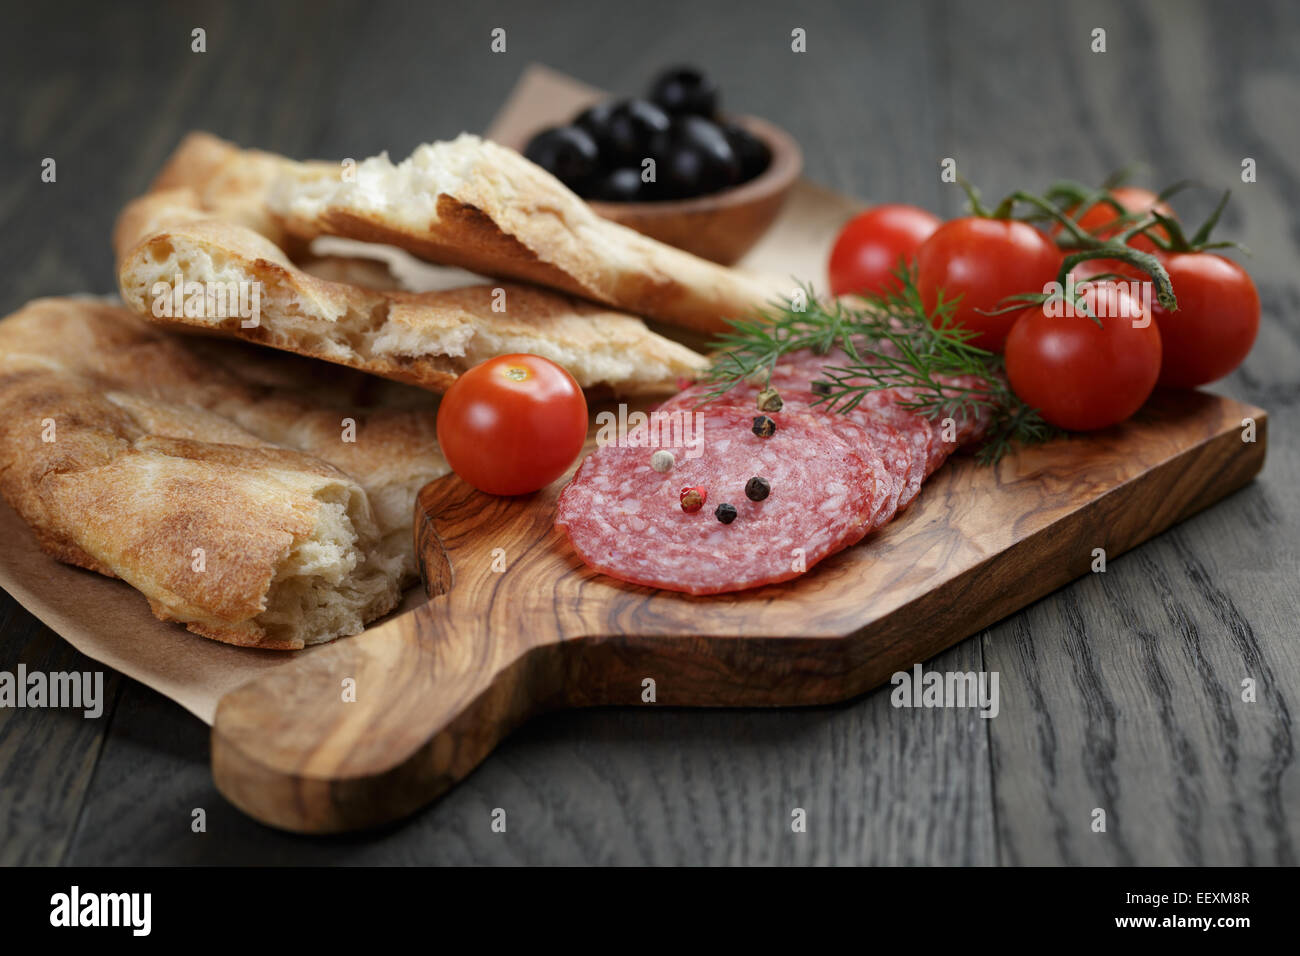 Antipasti with salami, olives, tomatoes and bread on wood table Stock Photo